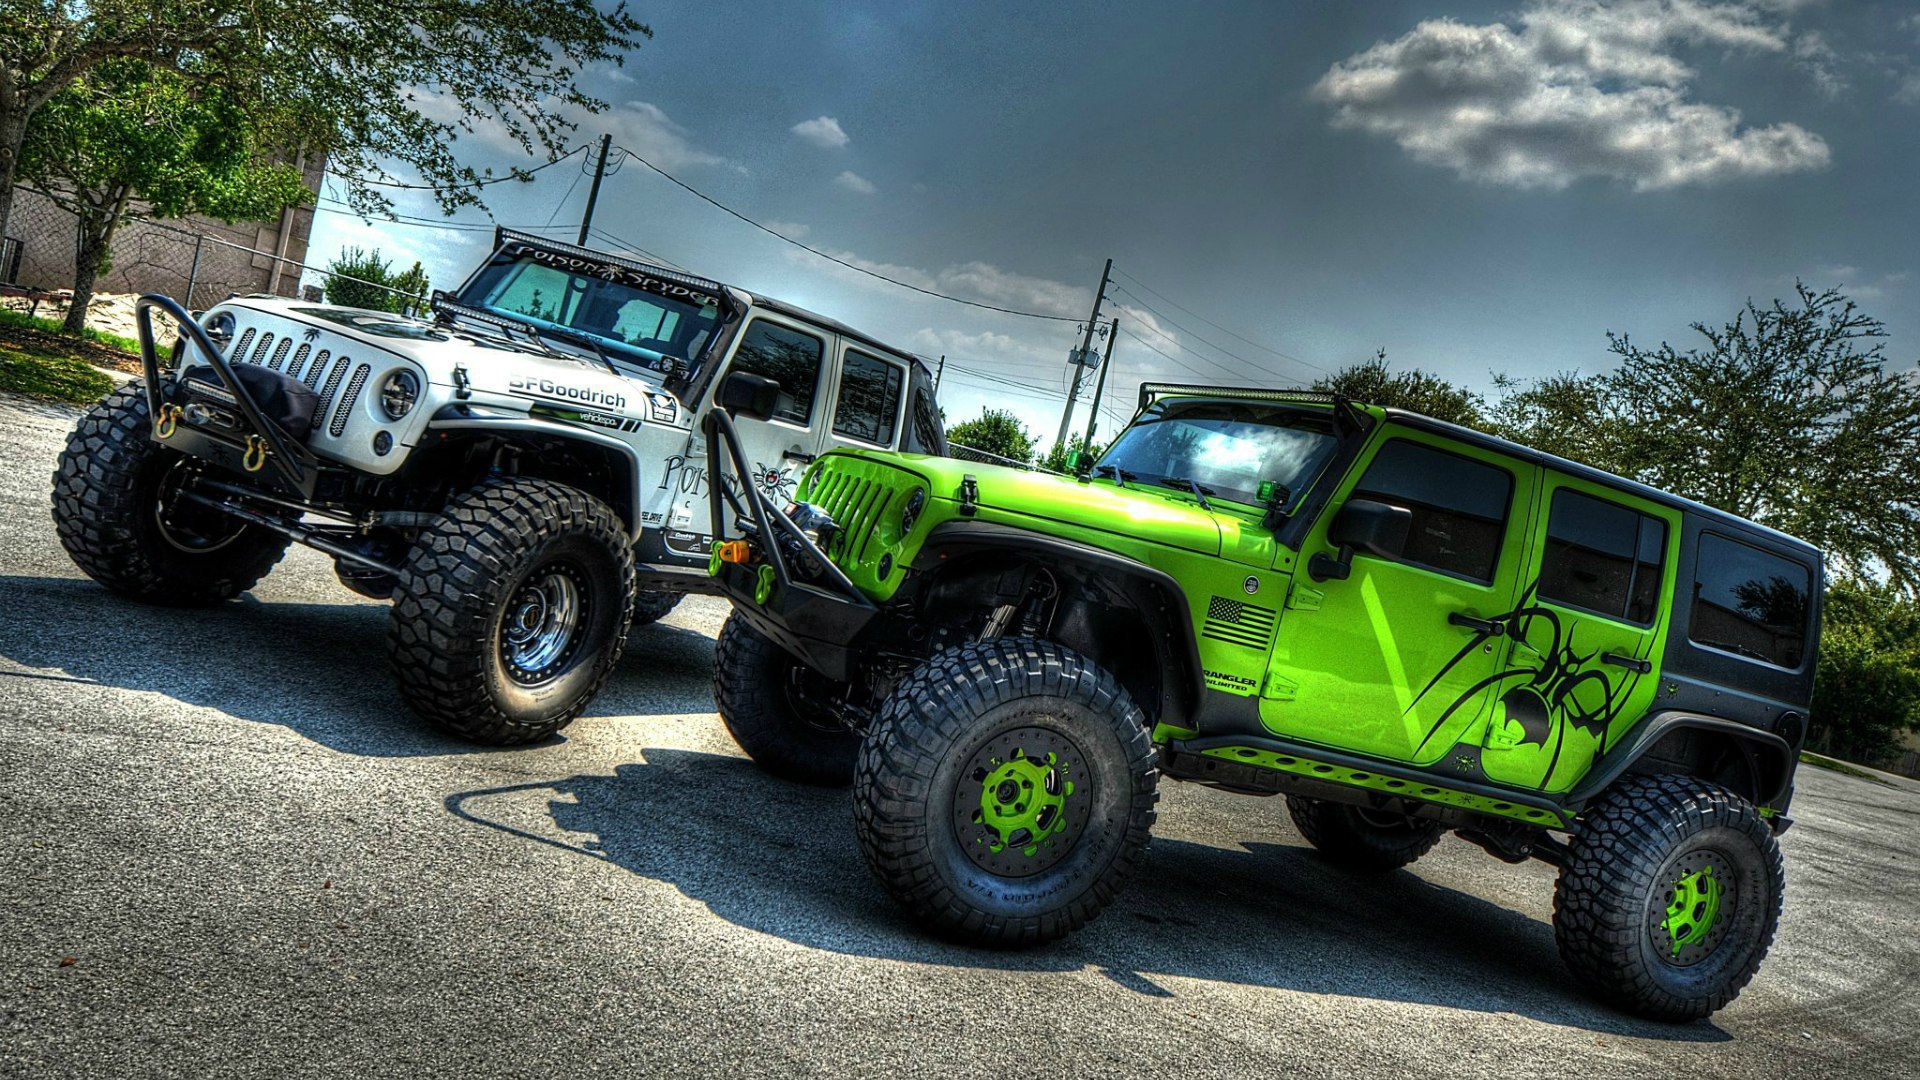 Two cars Jeep Wrangler